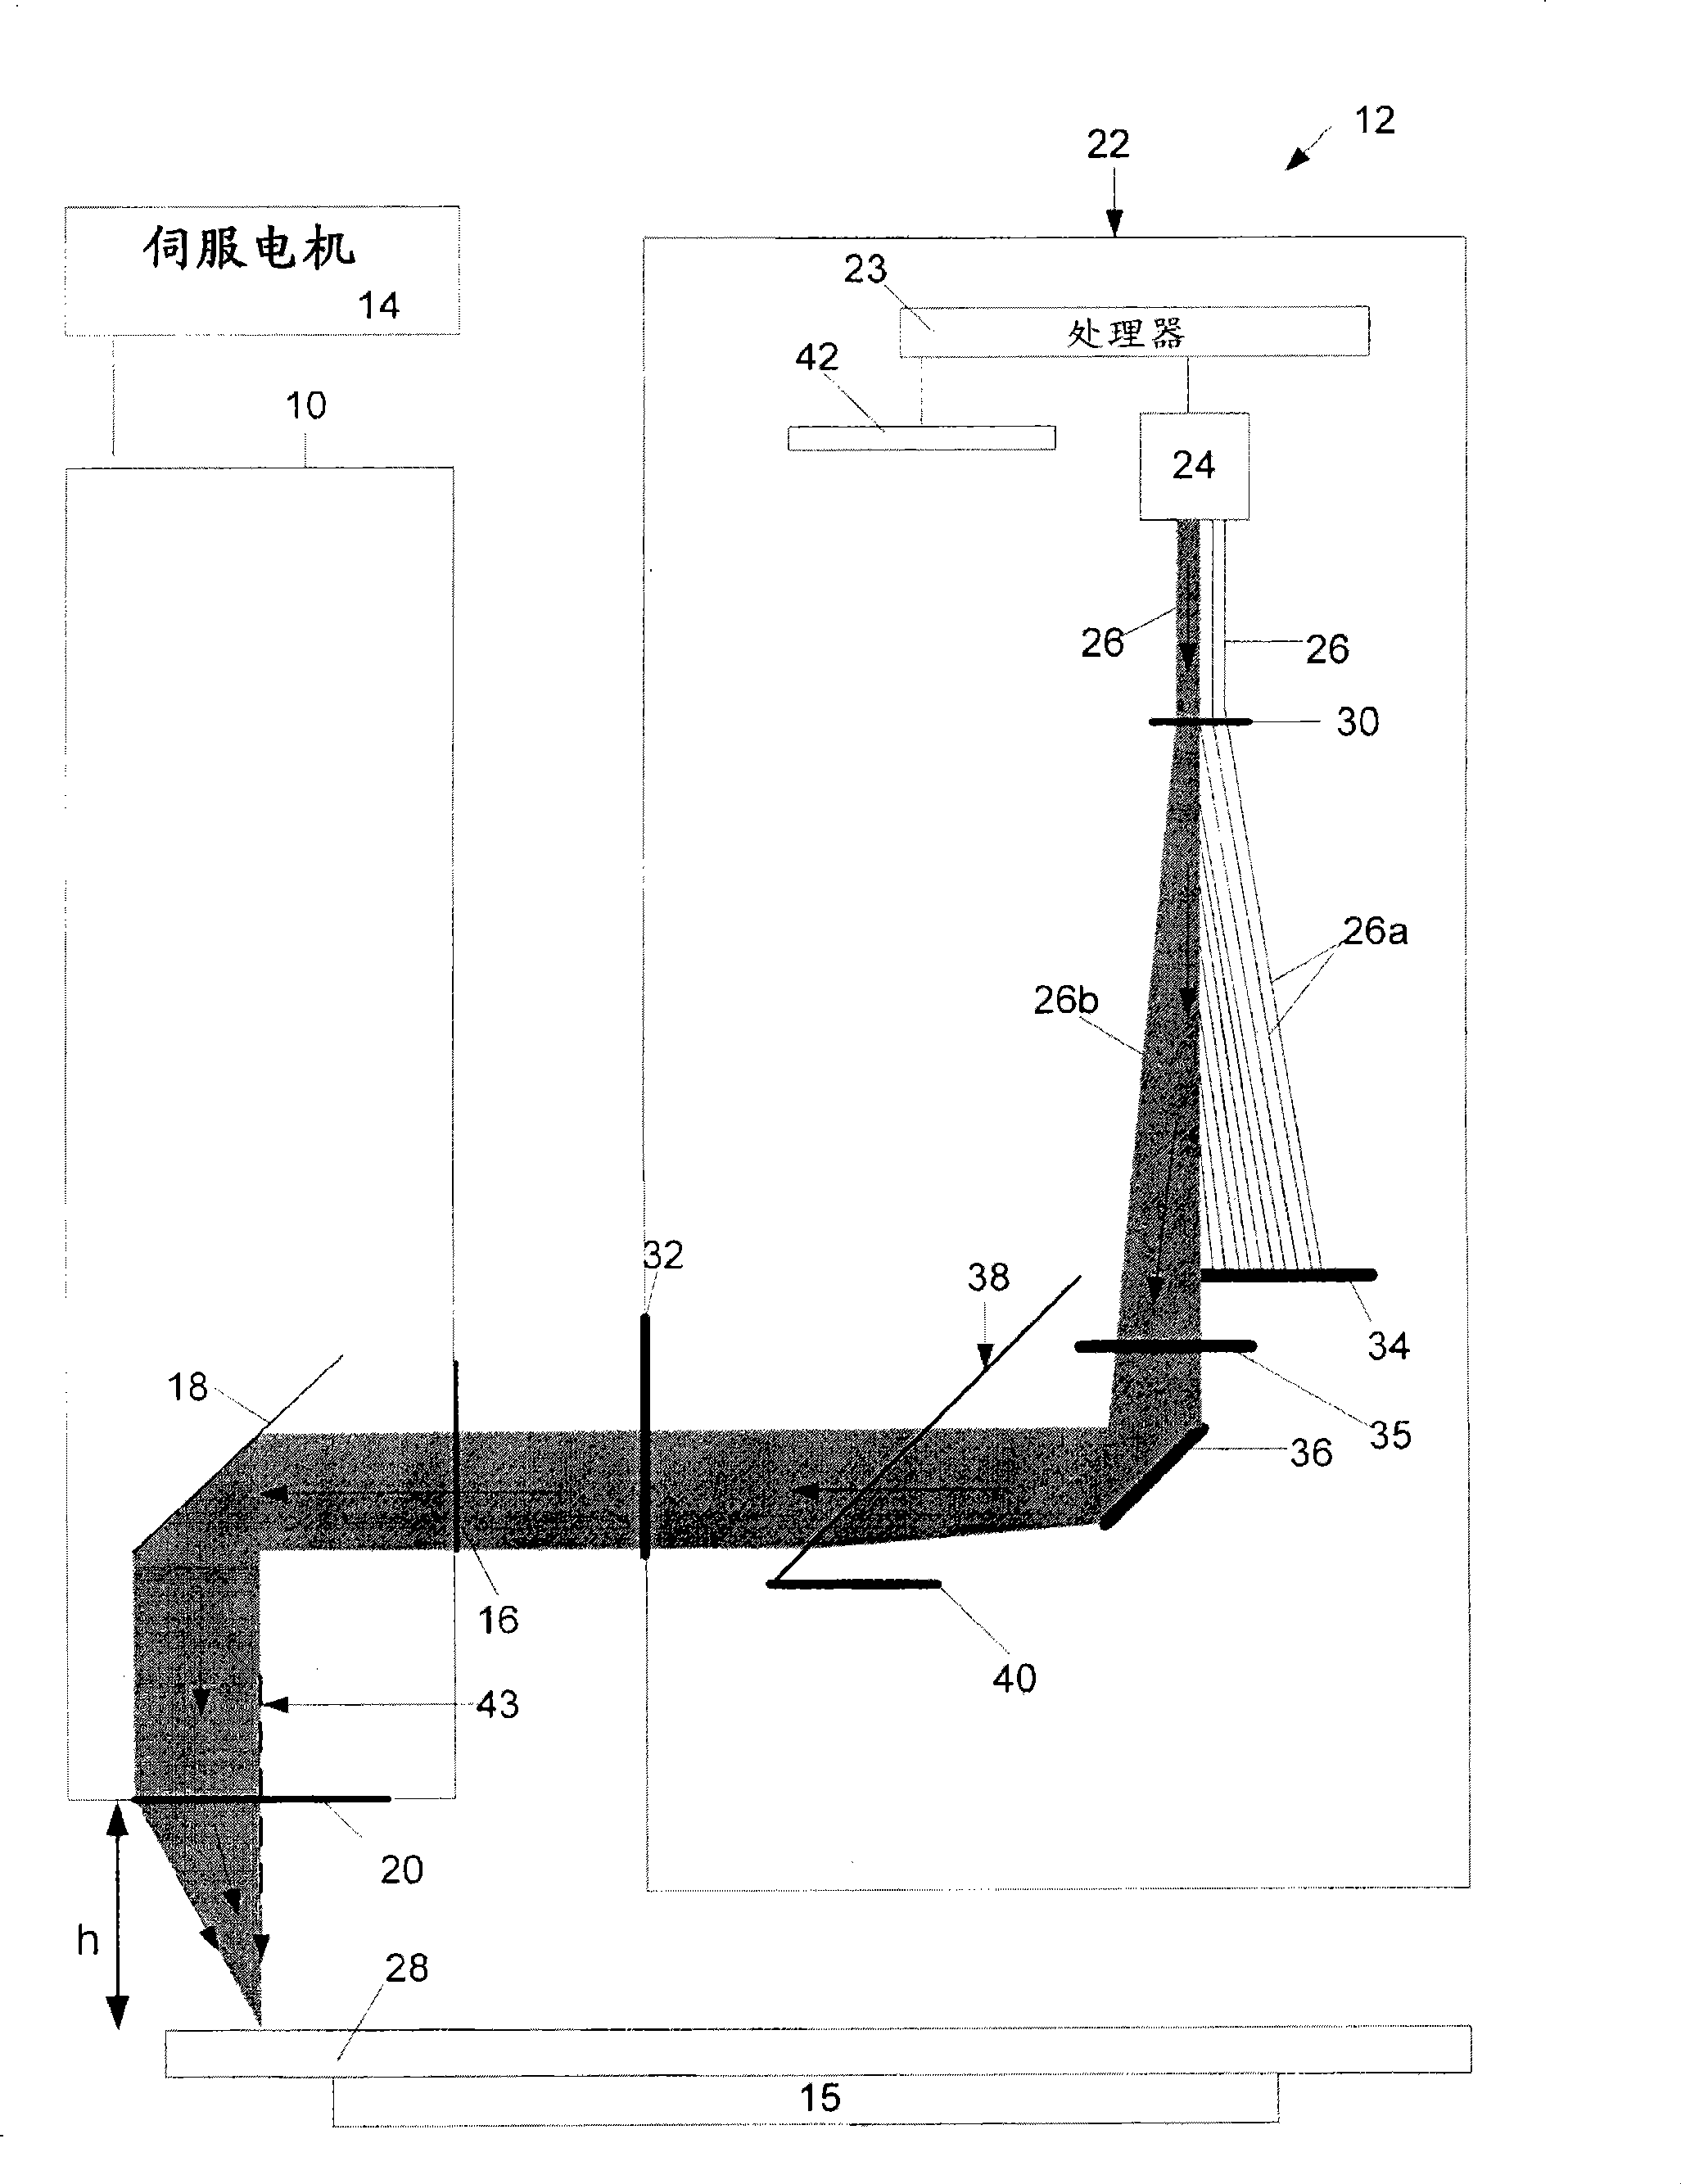 Method and apparatus for auto-focussing infinity corrected microscopes